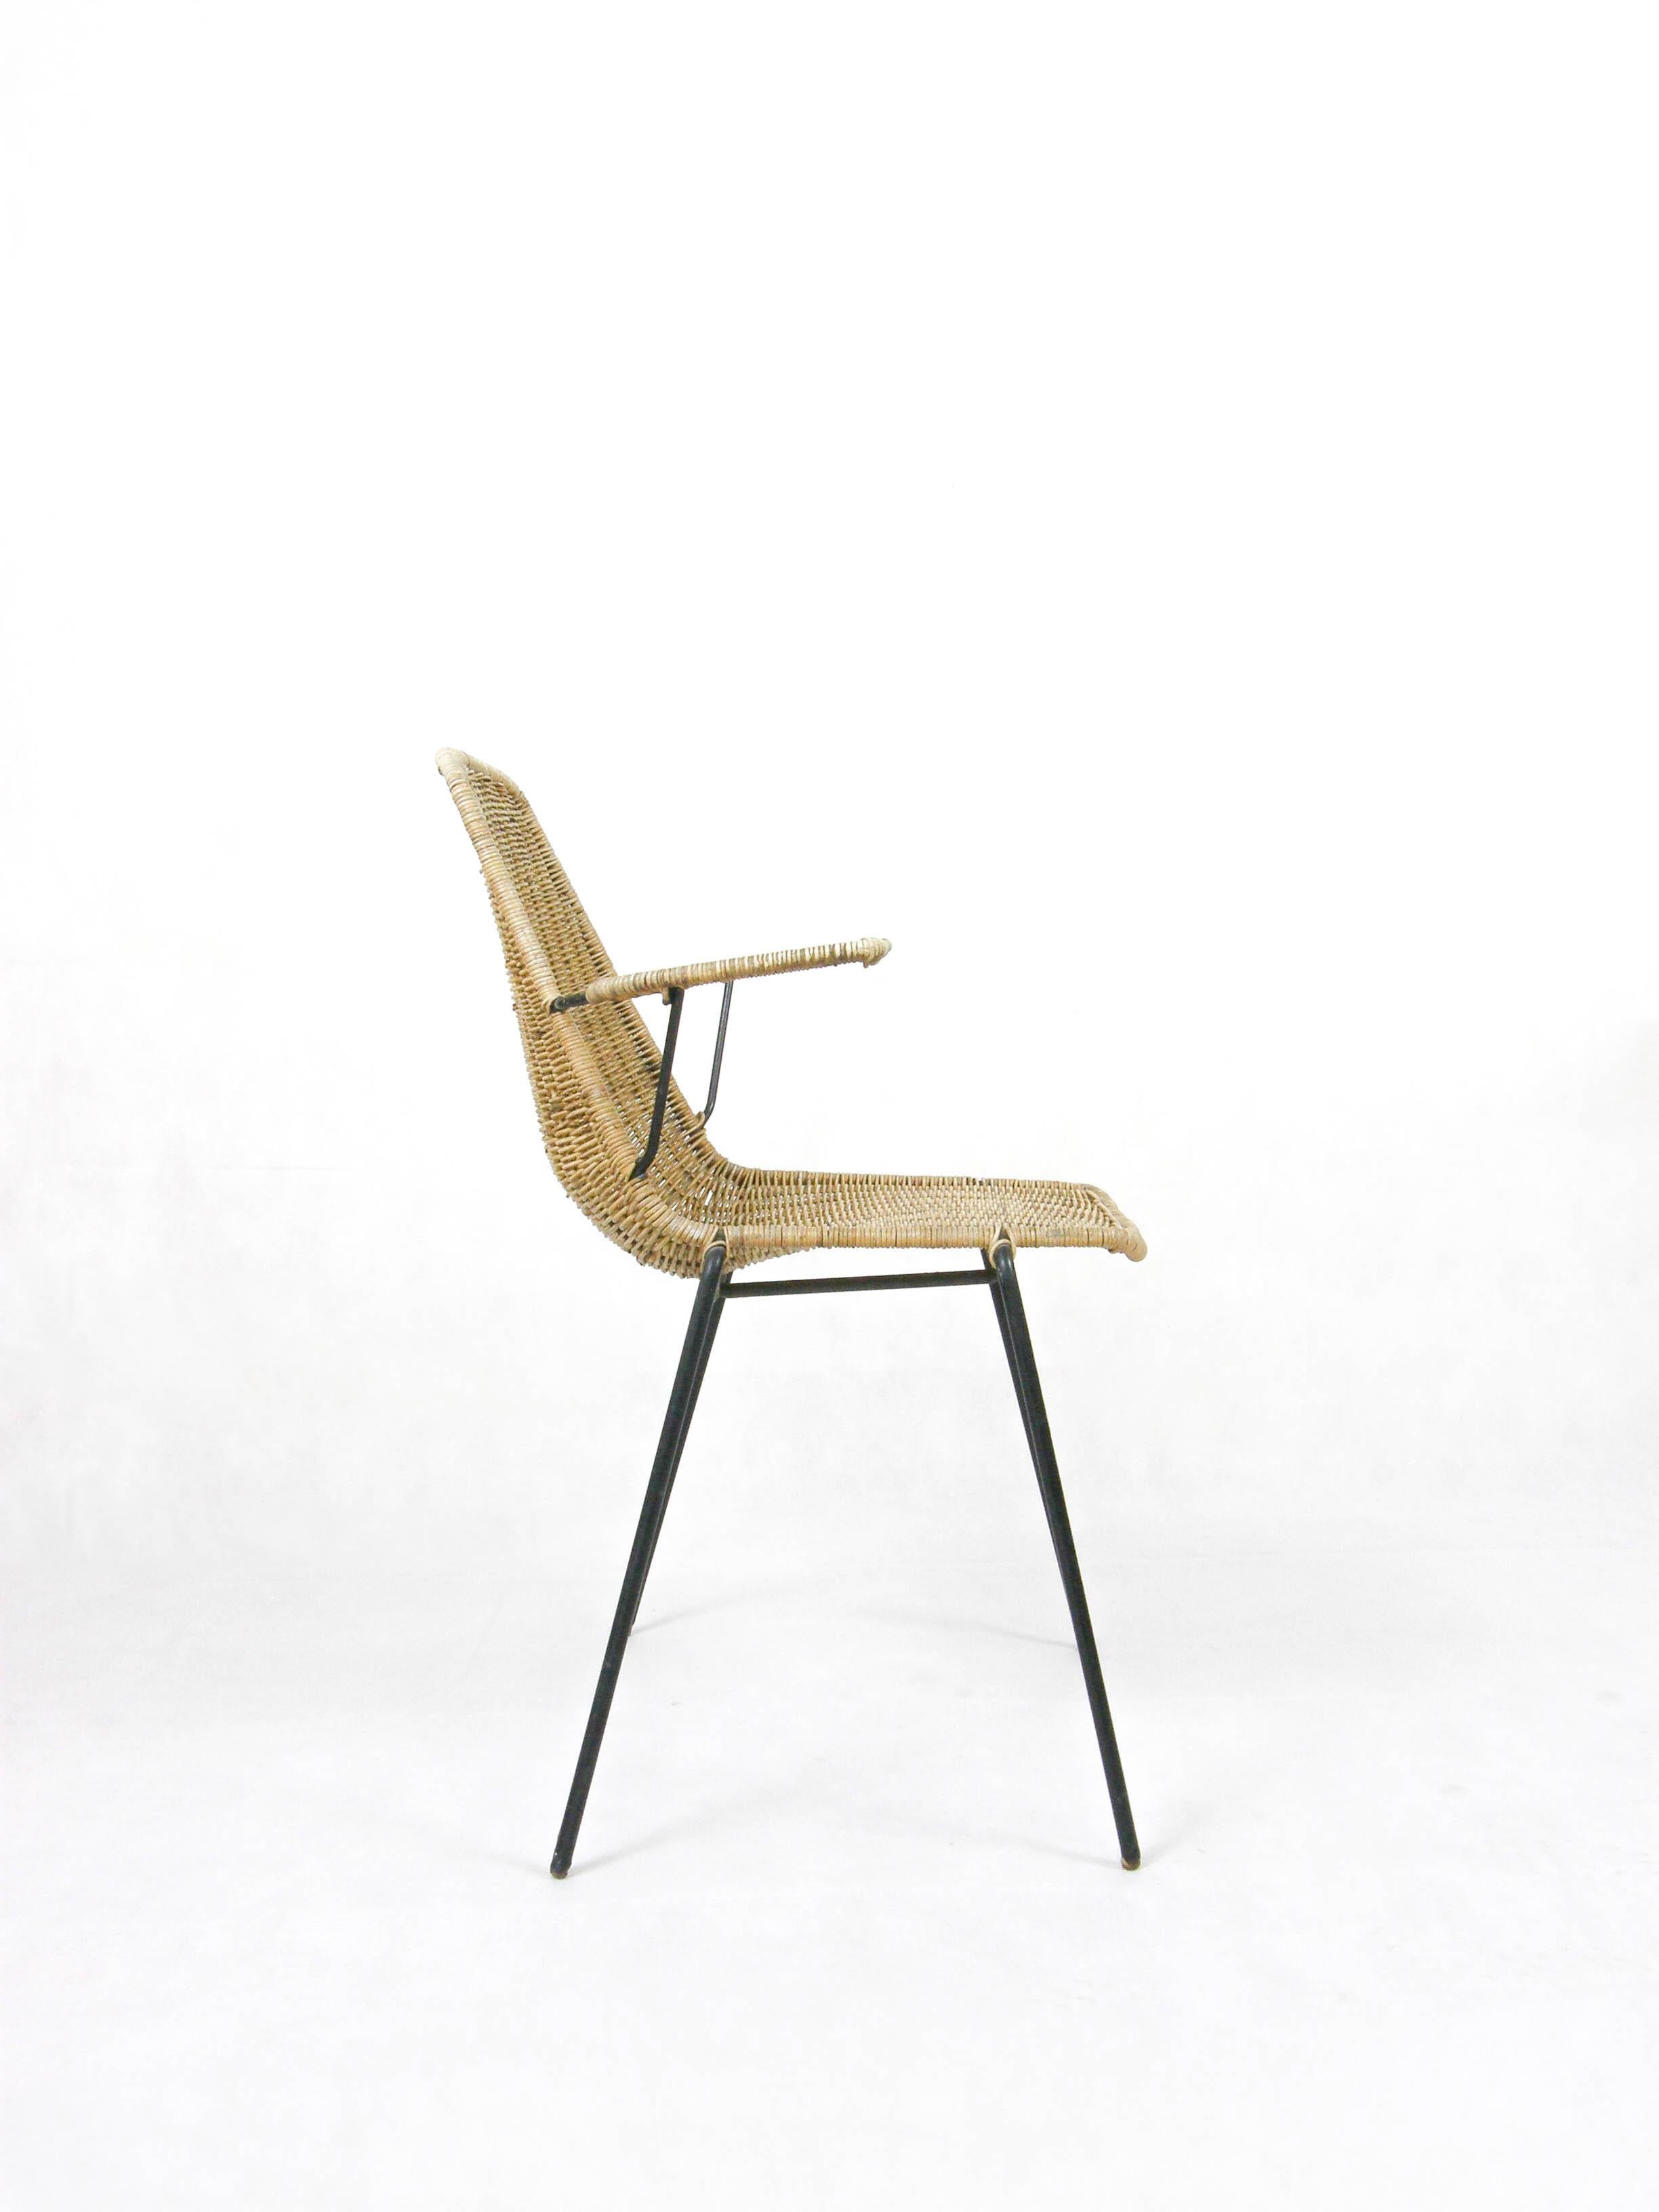 Chair with arms made of woven wicker and lacquered metal from mid-1950s Italy.
Designed by Franco Campo and Carlo Graffi and produced by their firm, 'Home Torino.

Sturdy and lightweight chair in excellent condition. 
Cozy and comfortable seating.